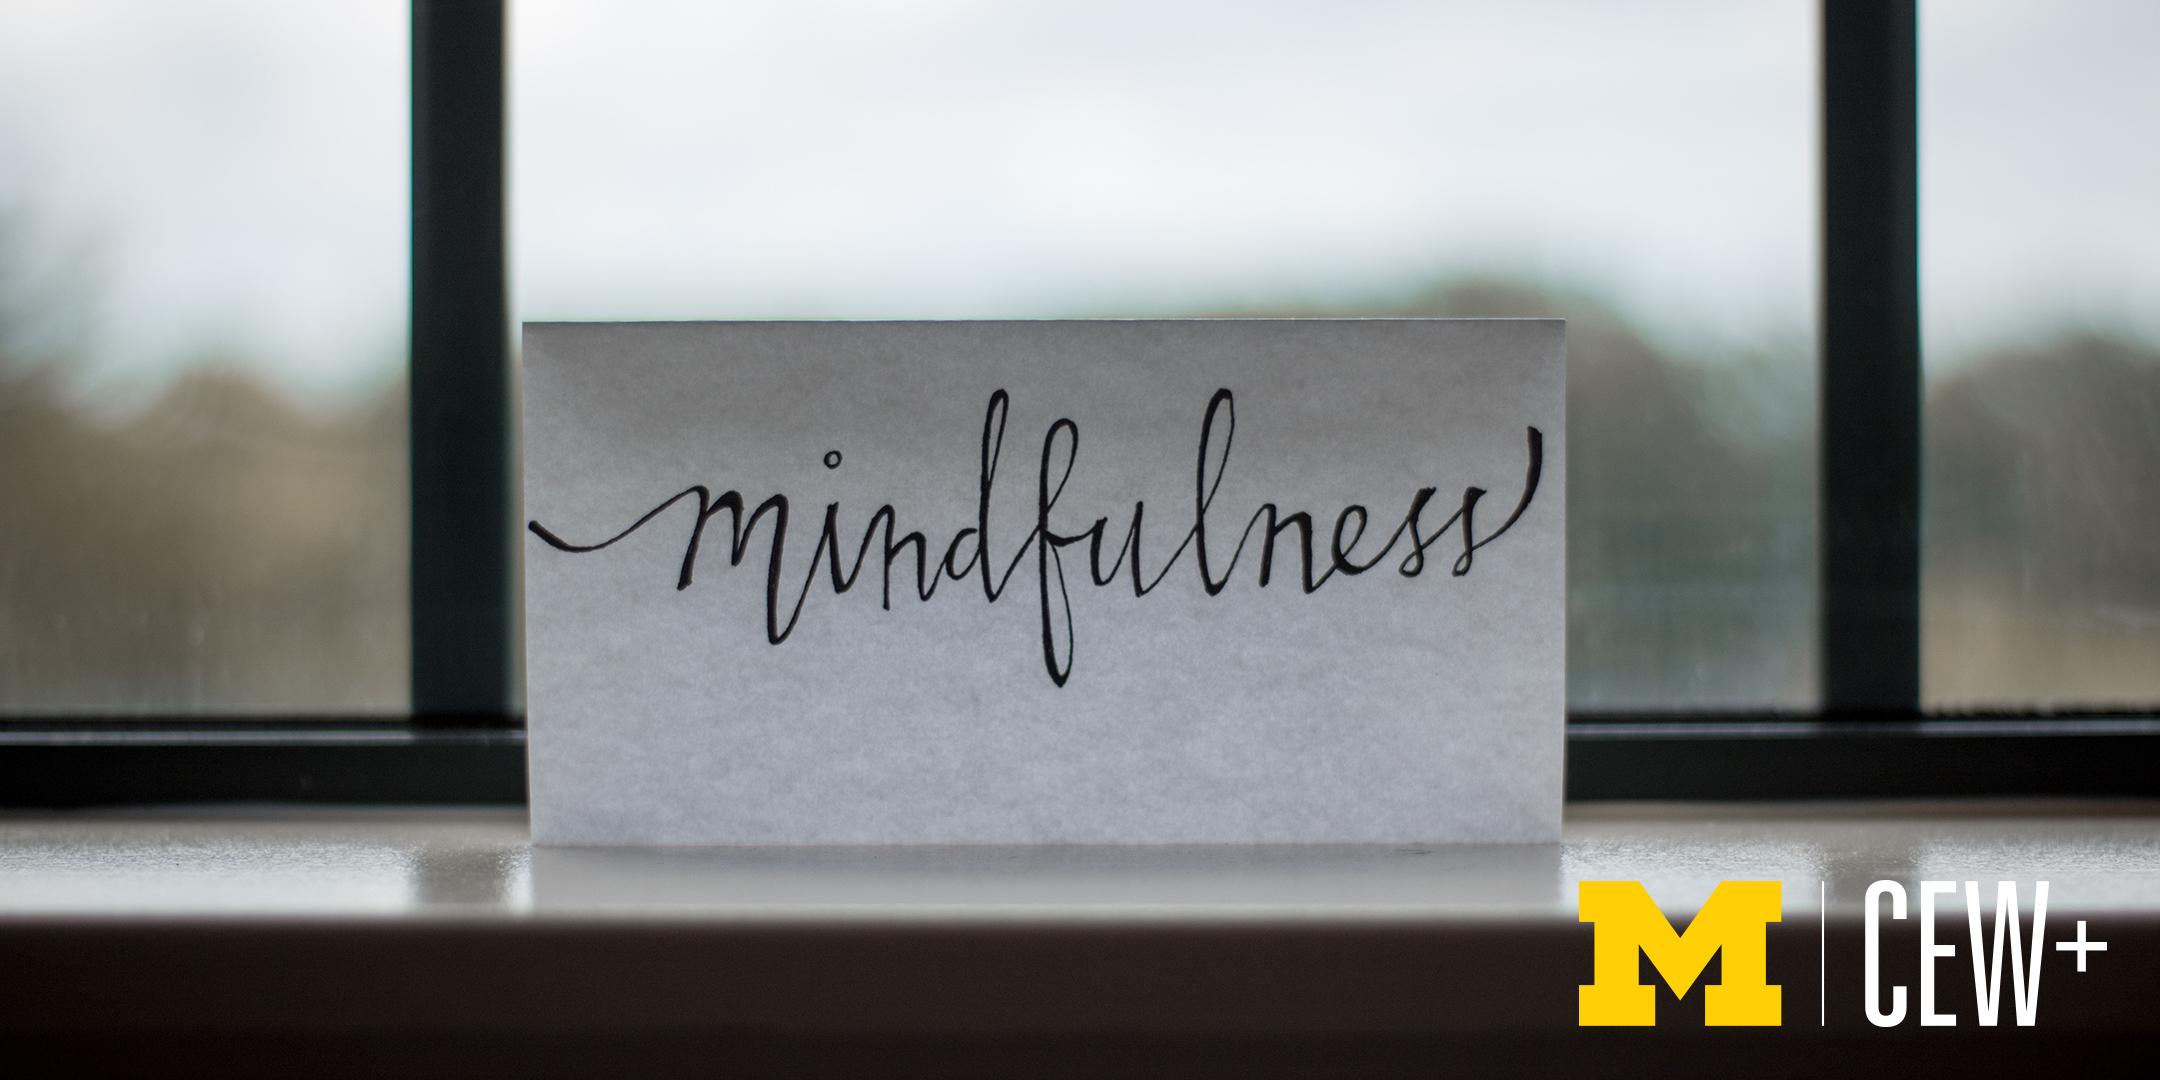 Winter 2020 CEW+Inspire Midweek Mindfulness-Guided Sits